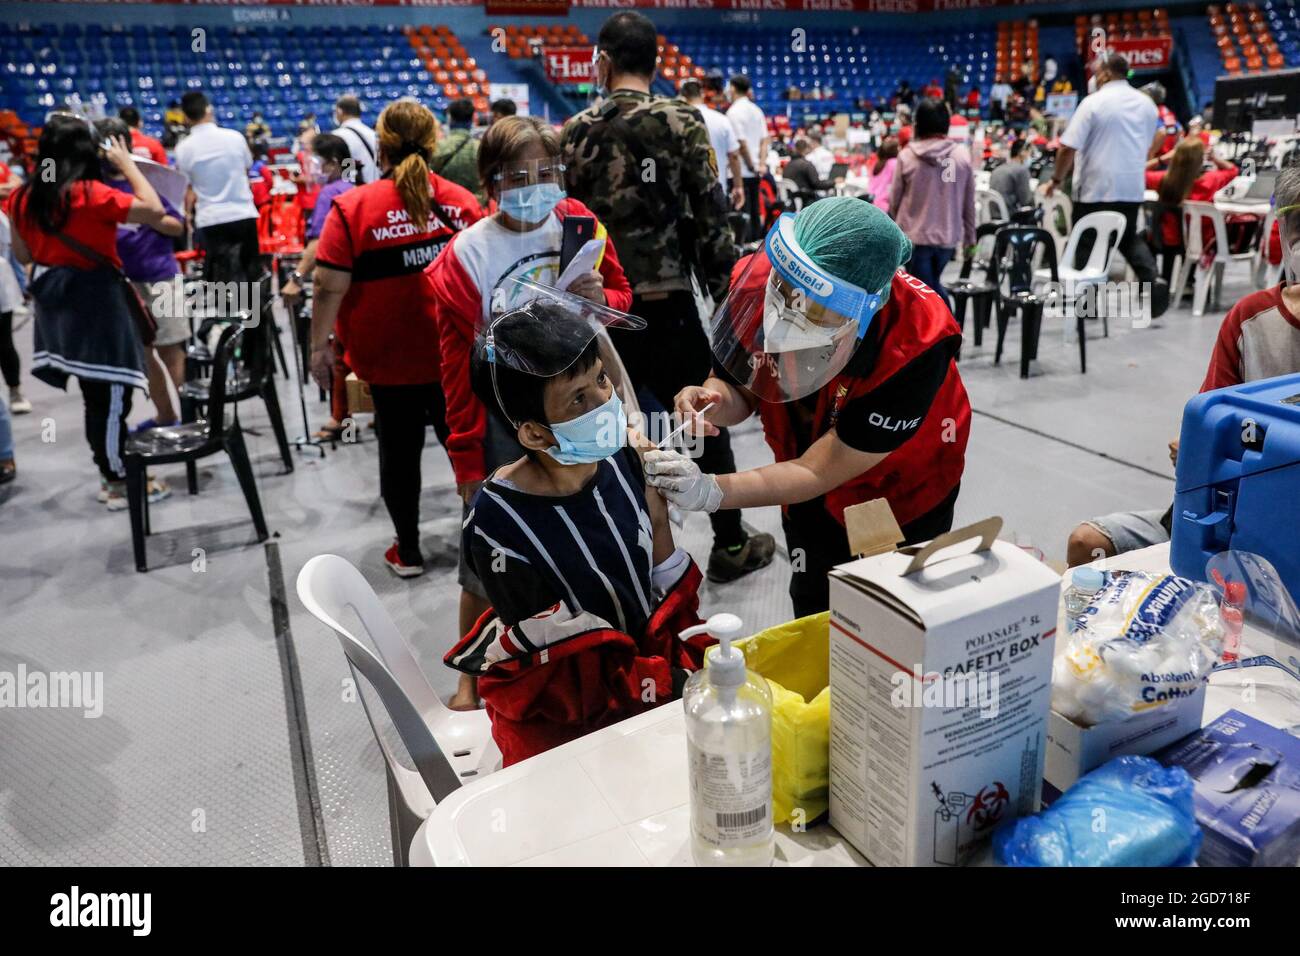 Medical workers inoculate persons with disabilities with the Johnson & Johnson COVID-19 vaccine at the Filoil Flying-V Arena in San Juan City. Philippine officials said a local transmission of the highly contagious delta variant of the COVID-19 virus has been detected in the country and announced tighter quarantine restrictions in the capital and a ban on the entry of travelers from hard-hit Malaysia and Thailand. Metro Manila, Philippines. Stock Photo